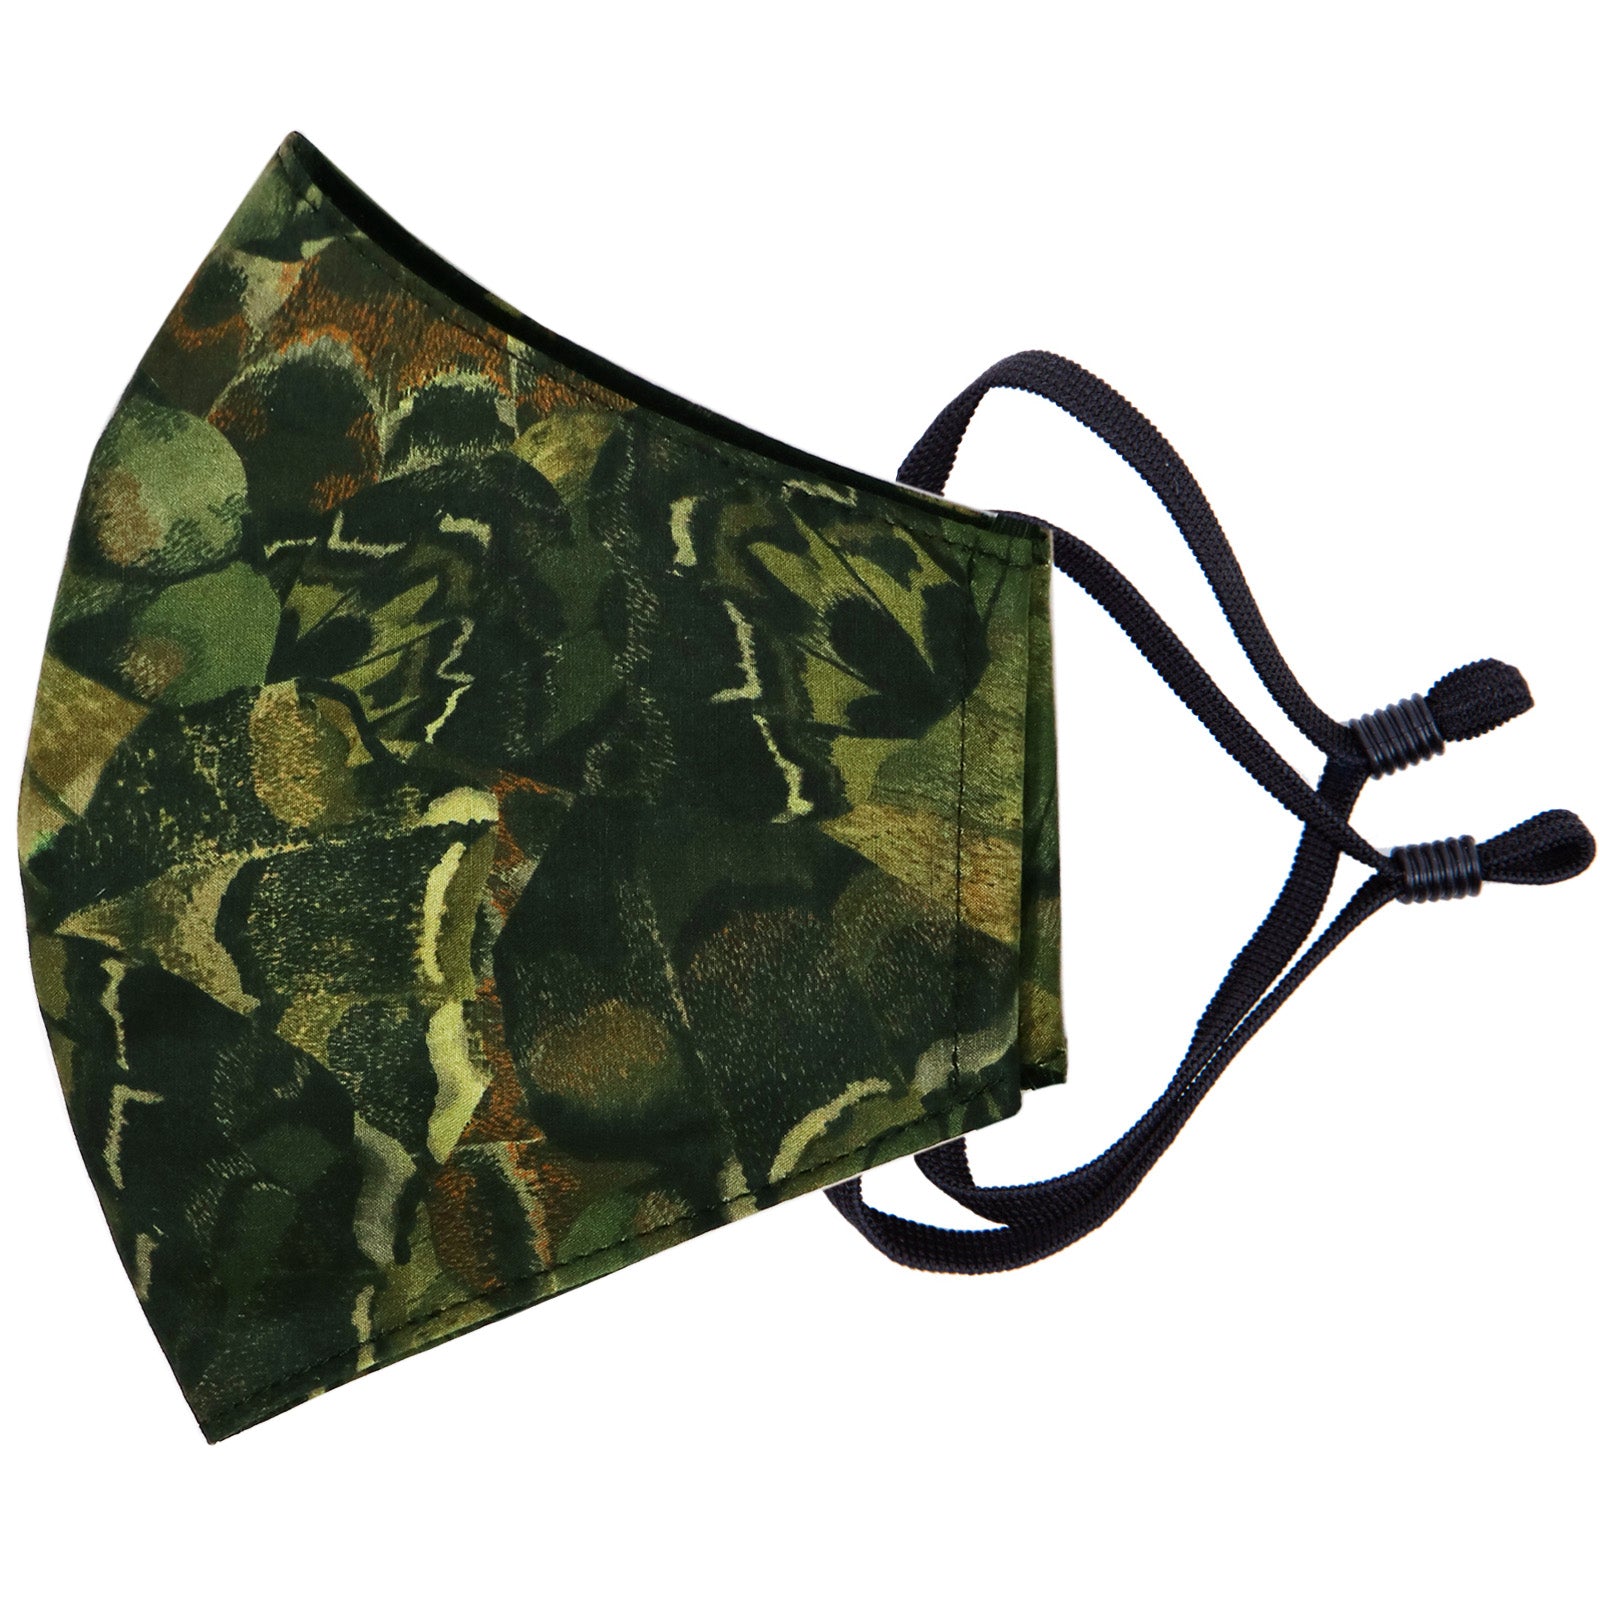 camo style fashion face mask in Liberty cotton made in New Zealand by Parisian and lined with merino for added comfort